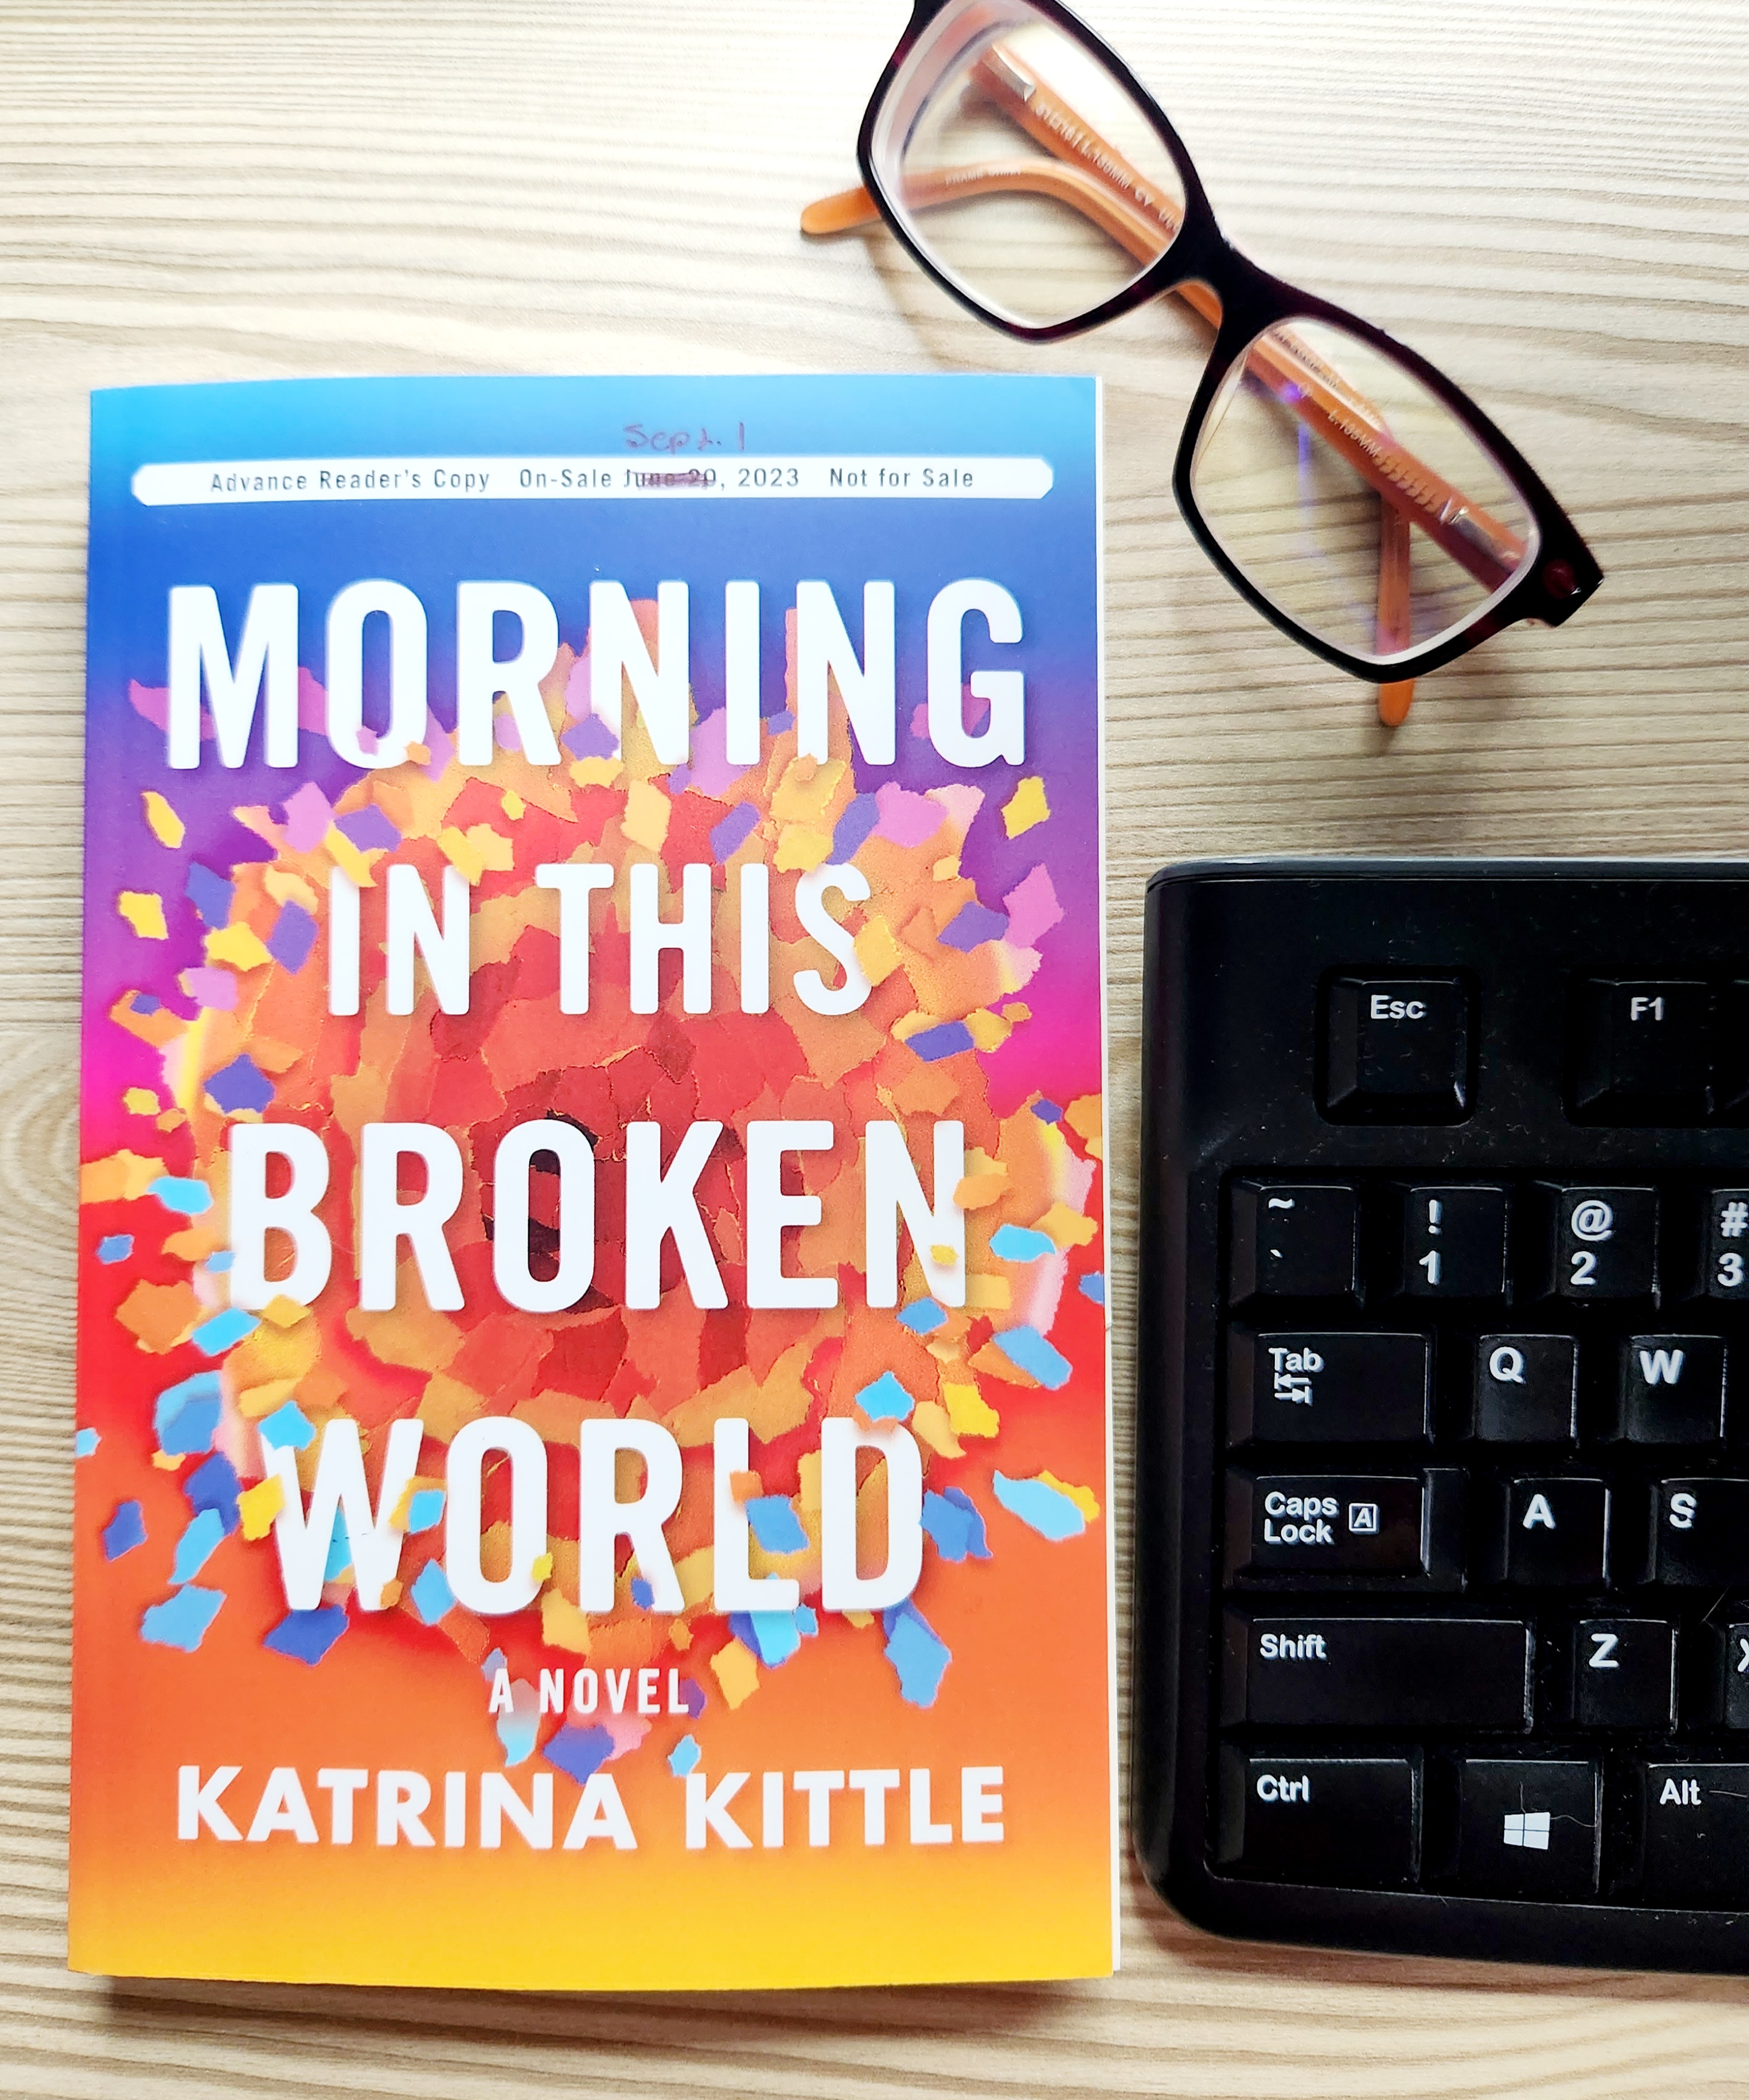 book cover of morning in this broken world; reading glasses; keyboard on a desk